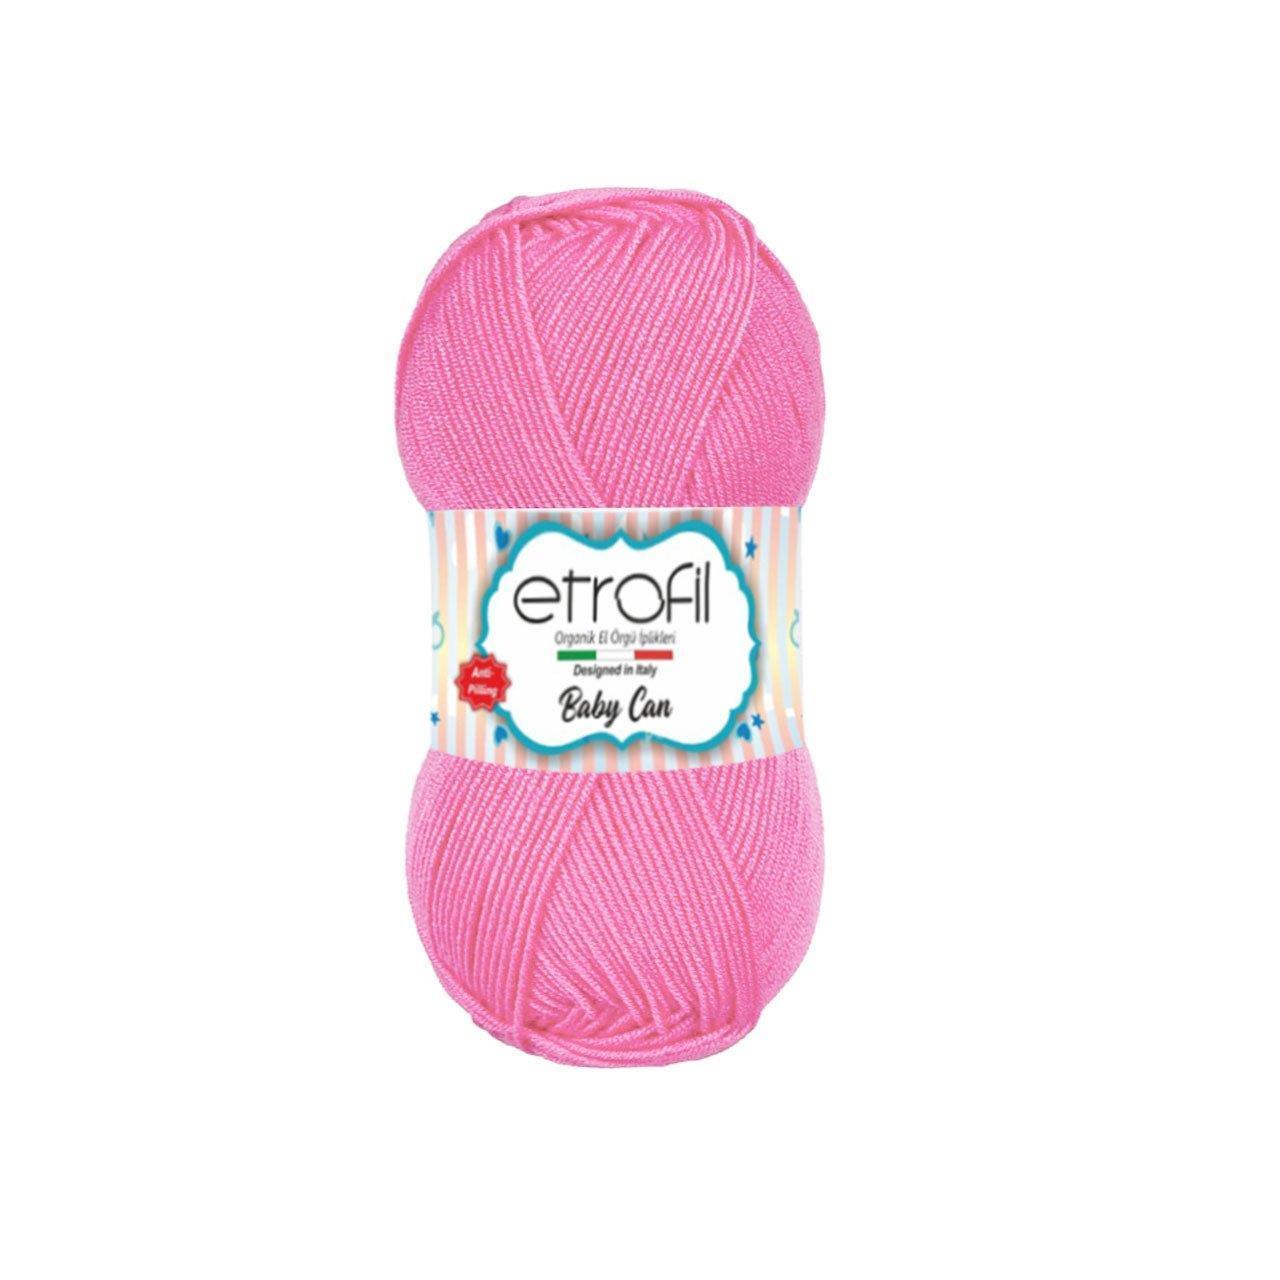 ETROFİL BABY CAN 80035 BLUE PINK